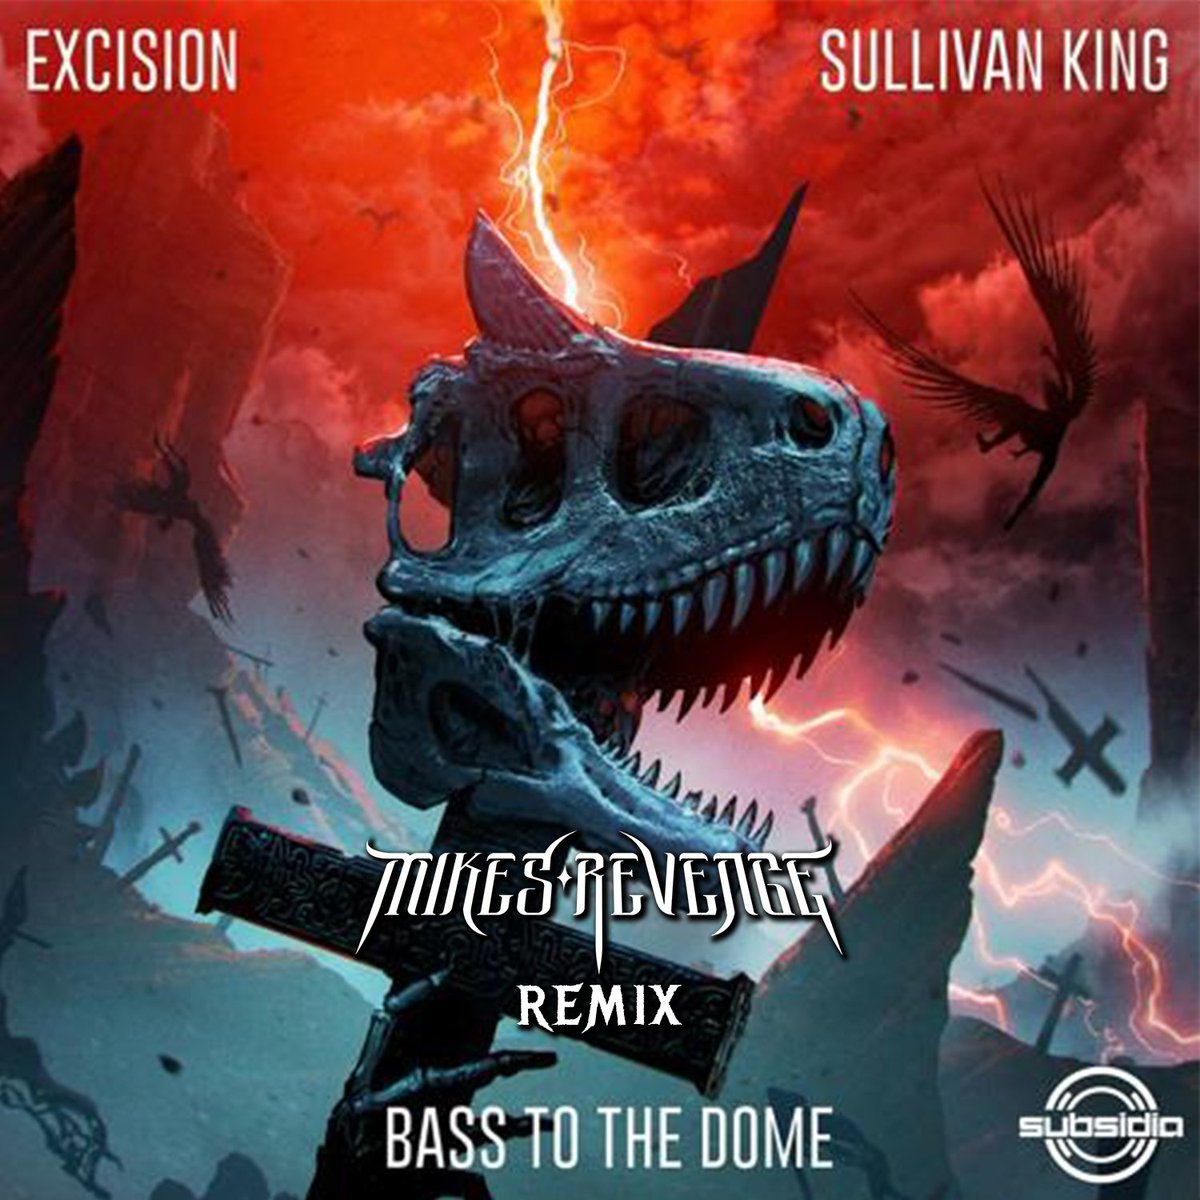 Our Bass To The Dome Remix is out🦖🦖
Huge shout out to @Excision & @SullivanKing for the dope original.

#excision #Sullivanking #art #lostlands #basscanyon #trap #dubstep #remix #fyp #viral #reels